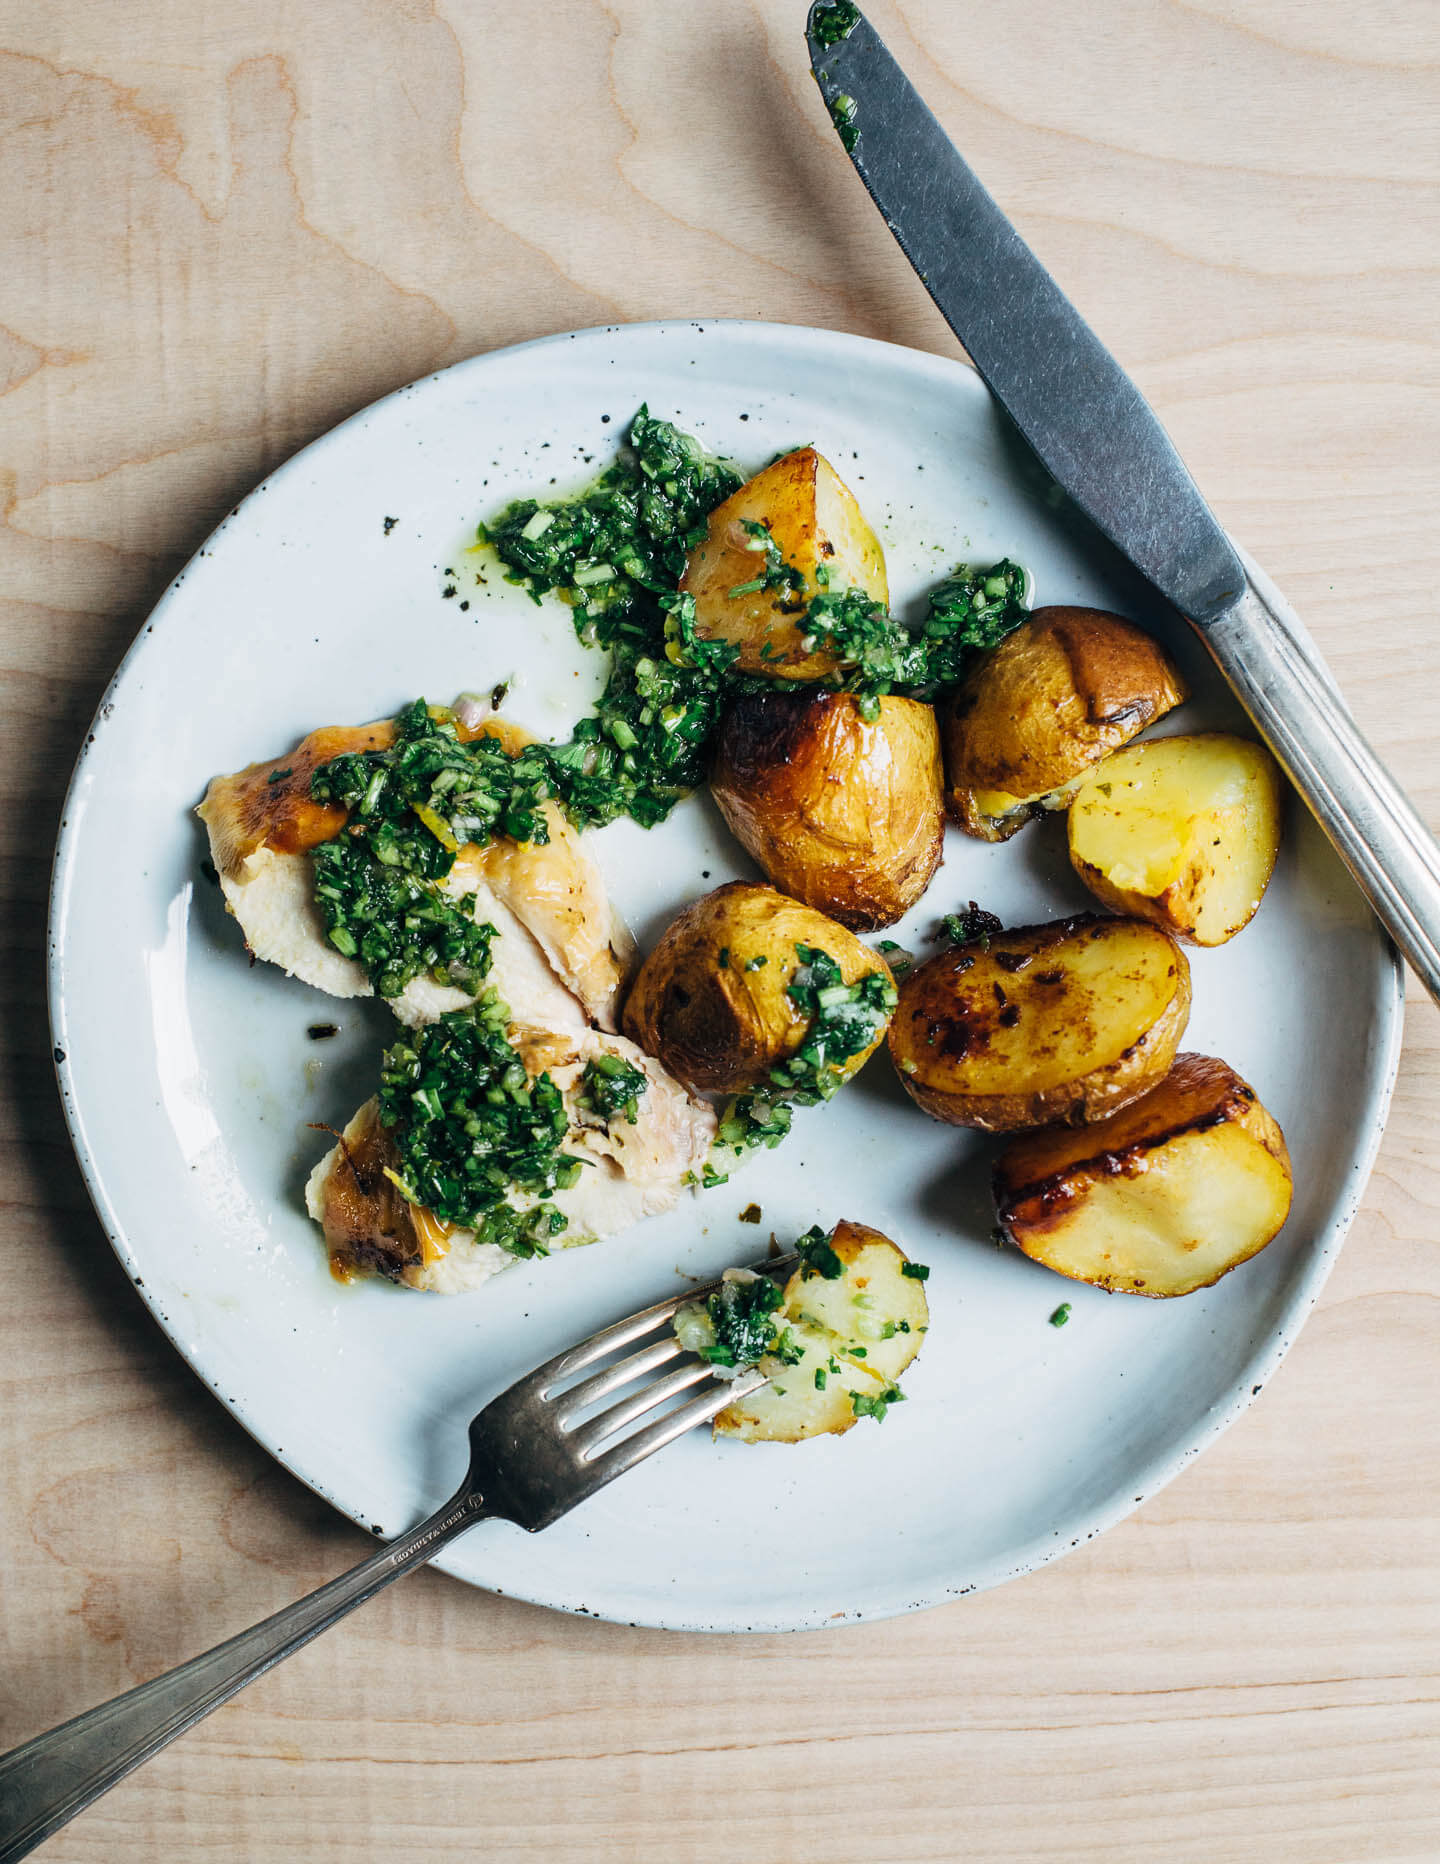 Fall weather means it's the right time to turn on your oven and make this crisp-skinned, deeply flavorful chimichurri roasted chicken with schmaltzy Yukon gold potatoes.